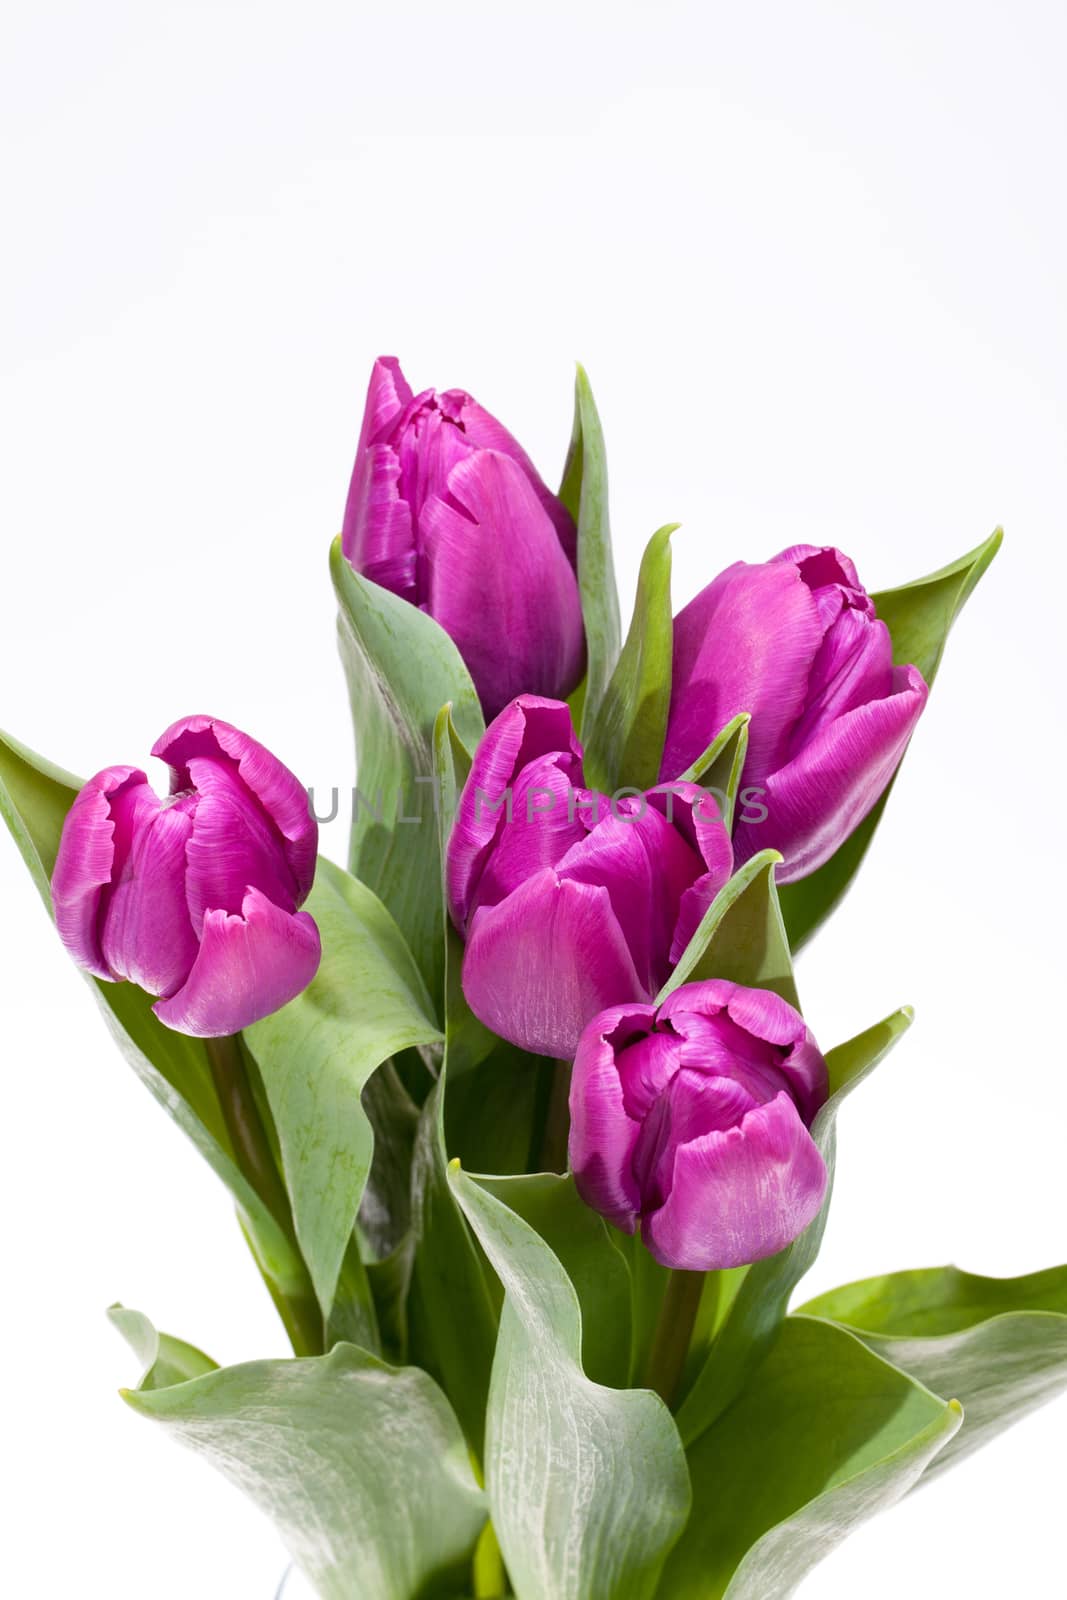 bouquet of blooming spring flowers violet tulips on white background